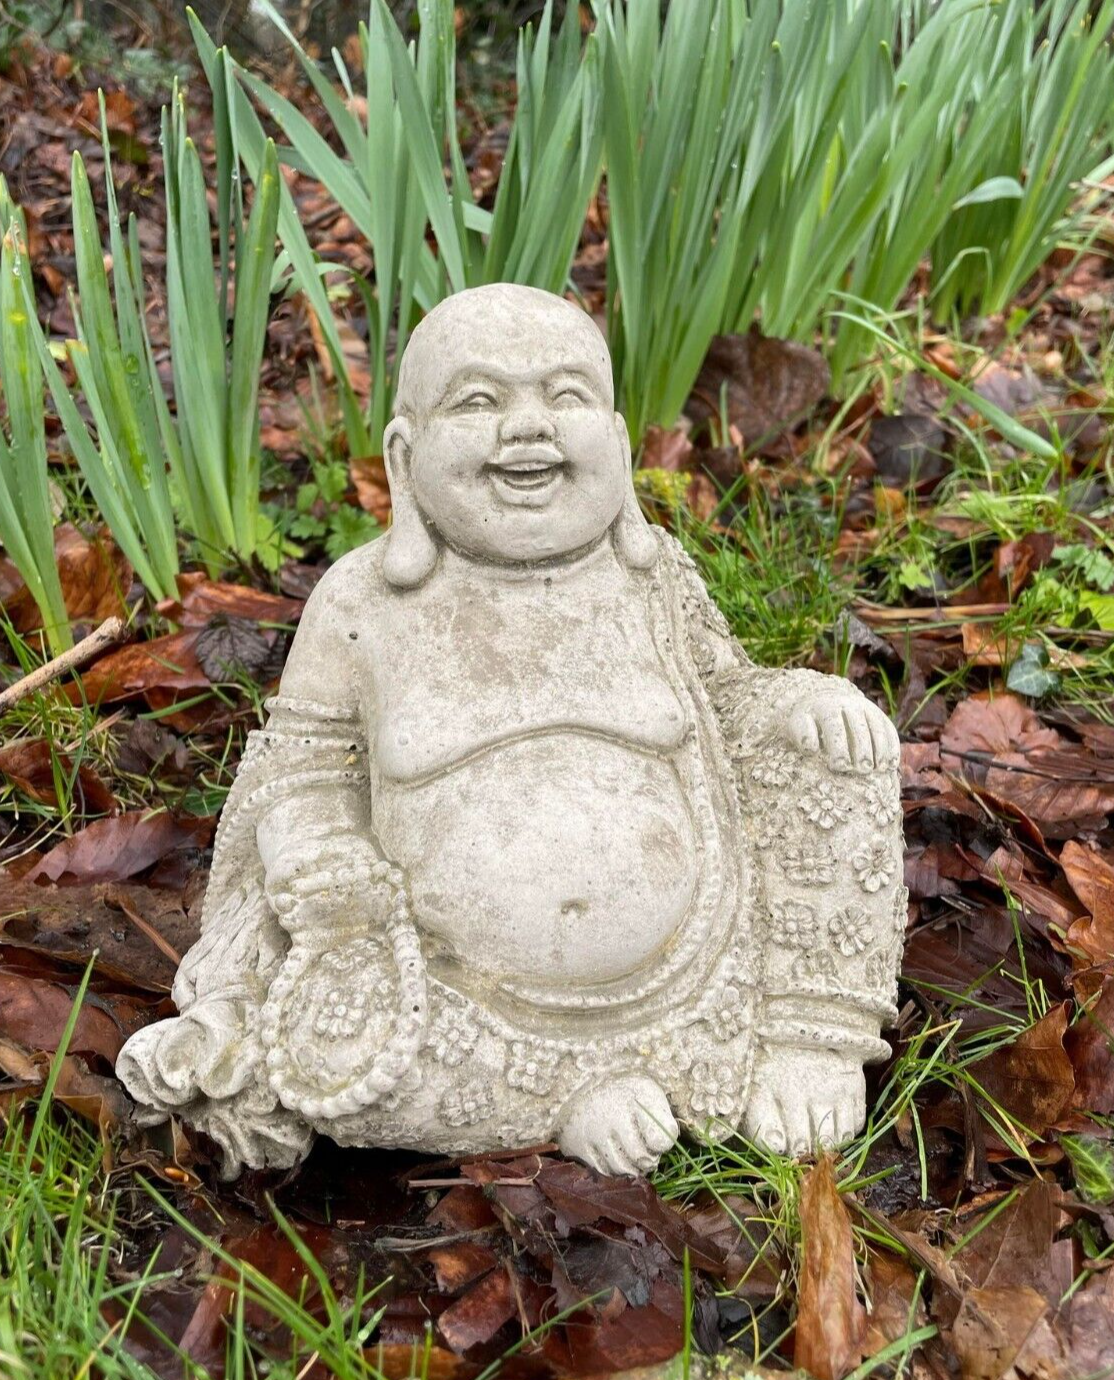 A large bellied Buddha with stretched ear-lobes and decorative garments. Wearing a large grin, sitting in the foliage of a British garden